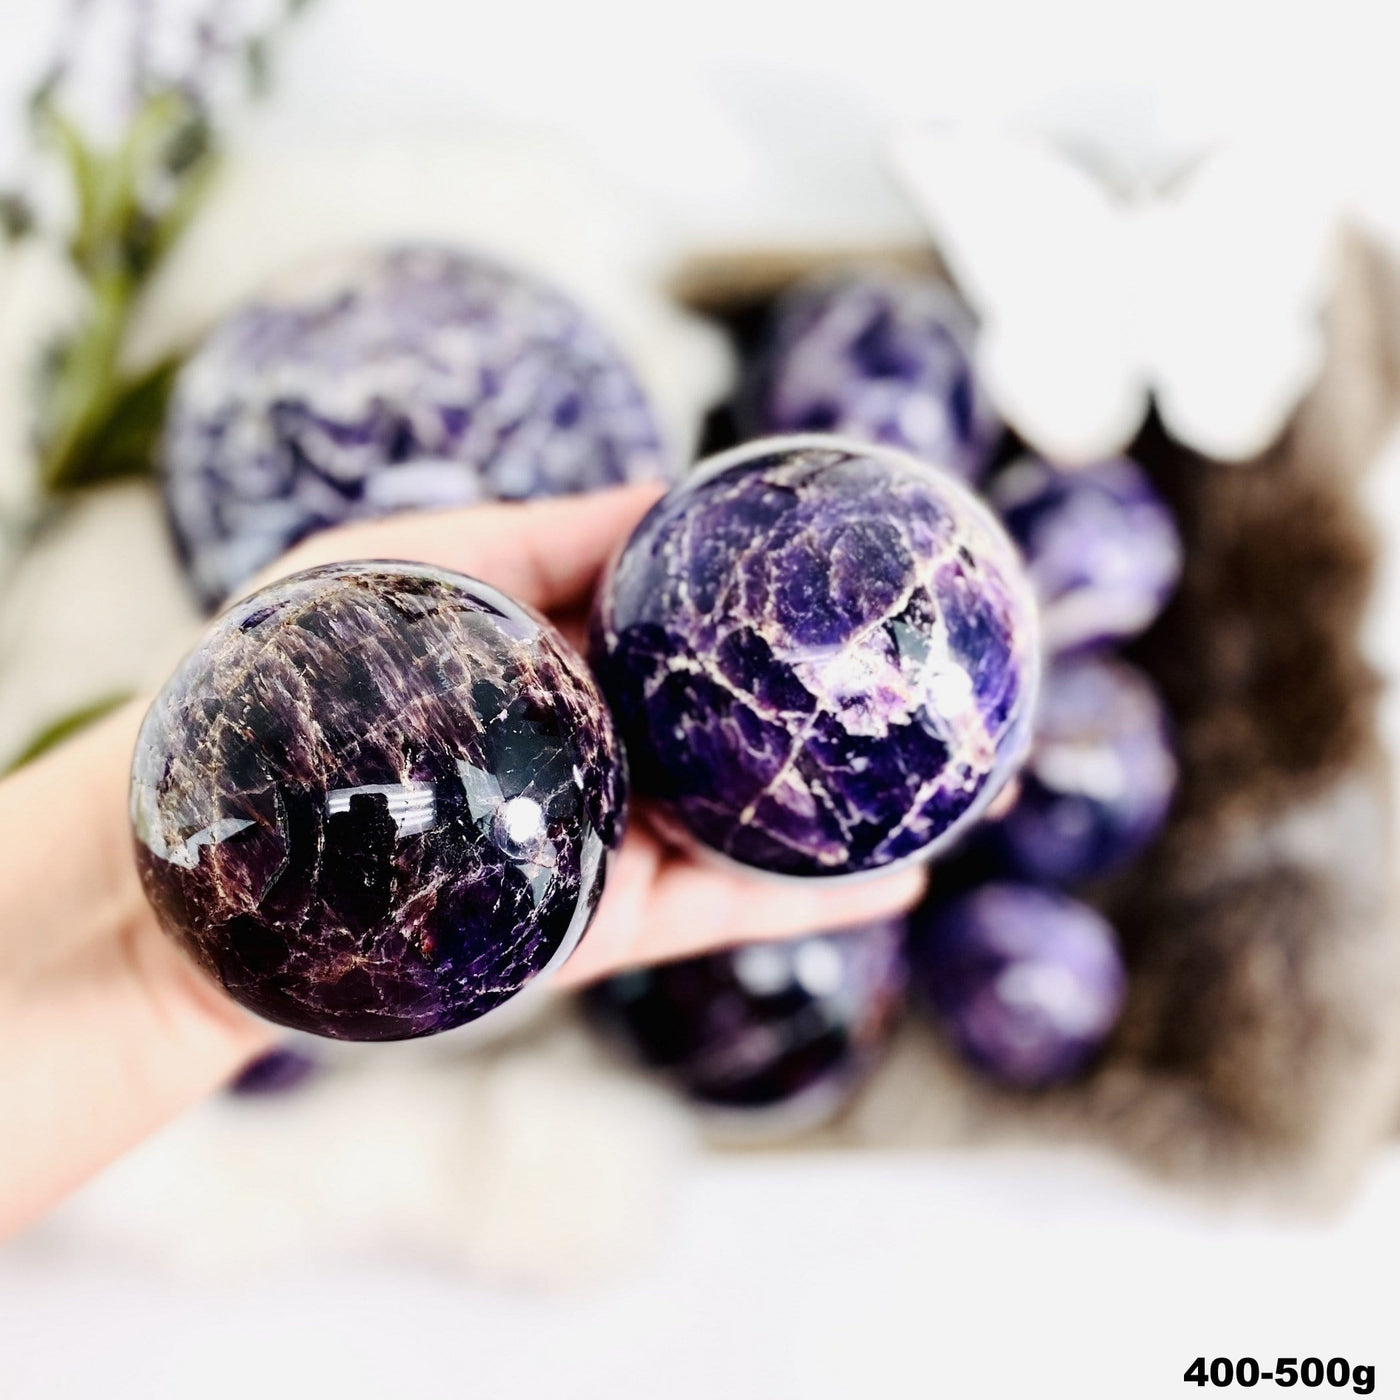 Chevron Amethyst Polished Spheres in a hand, size under 400-500g